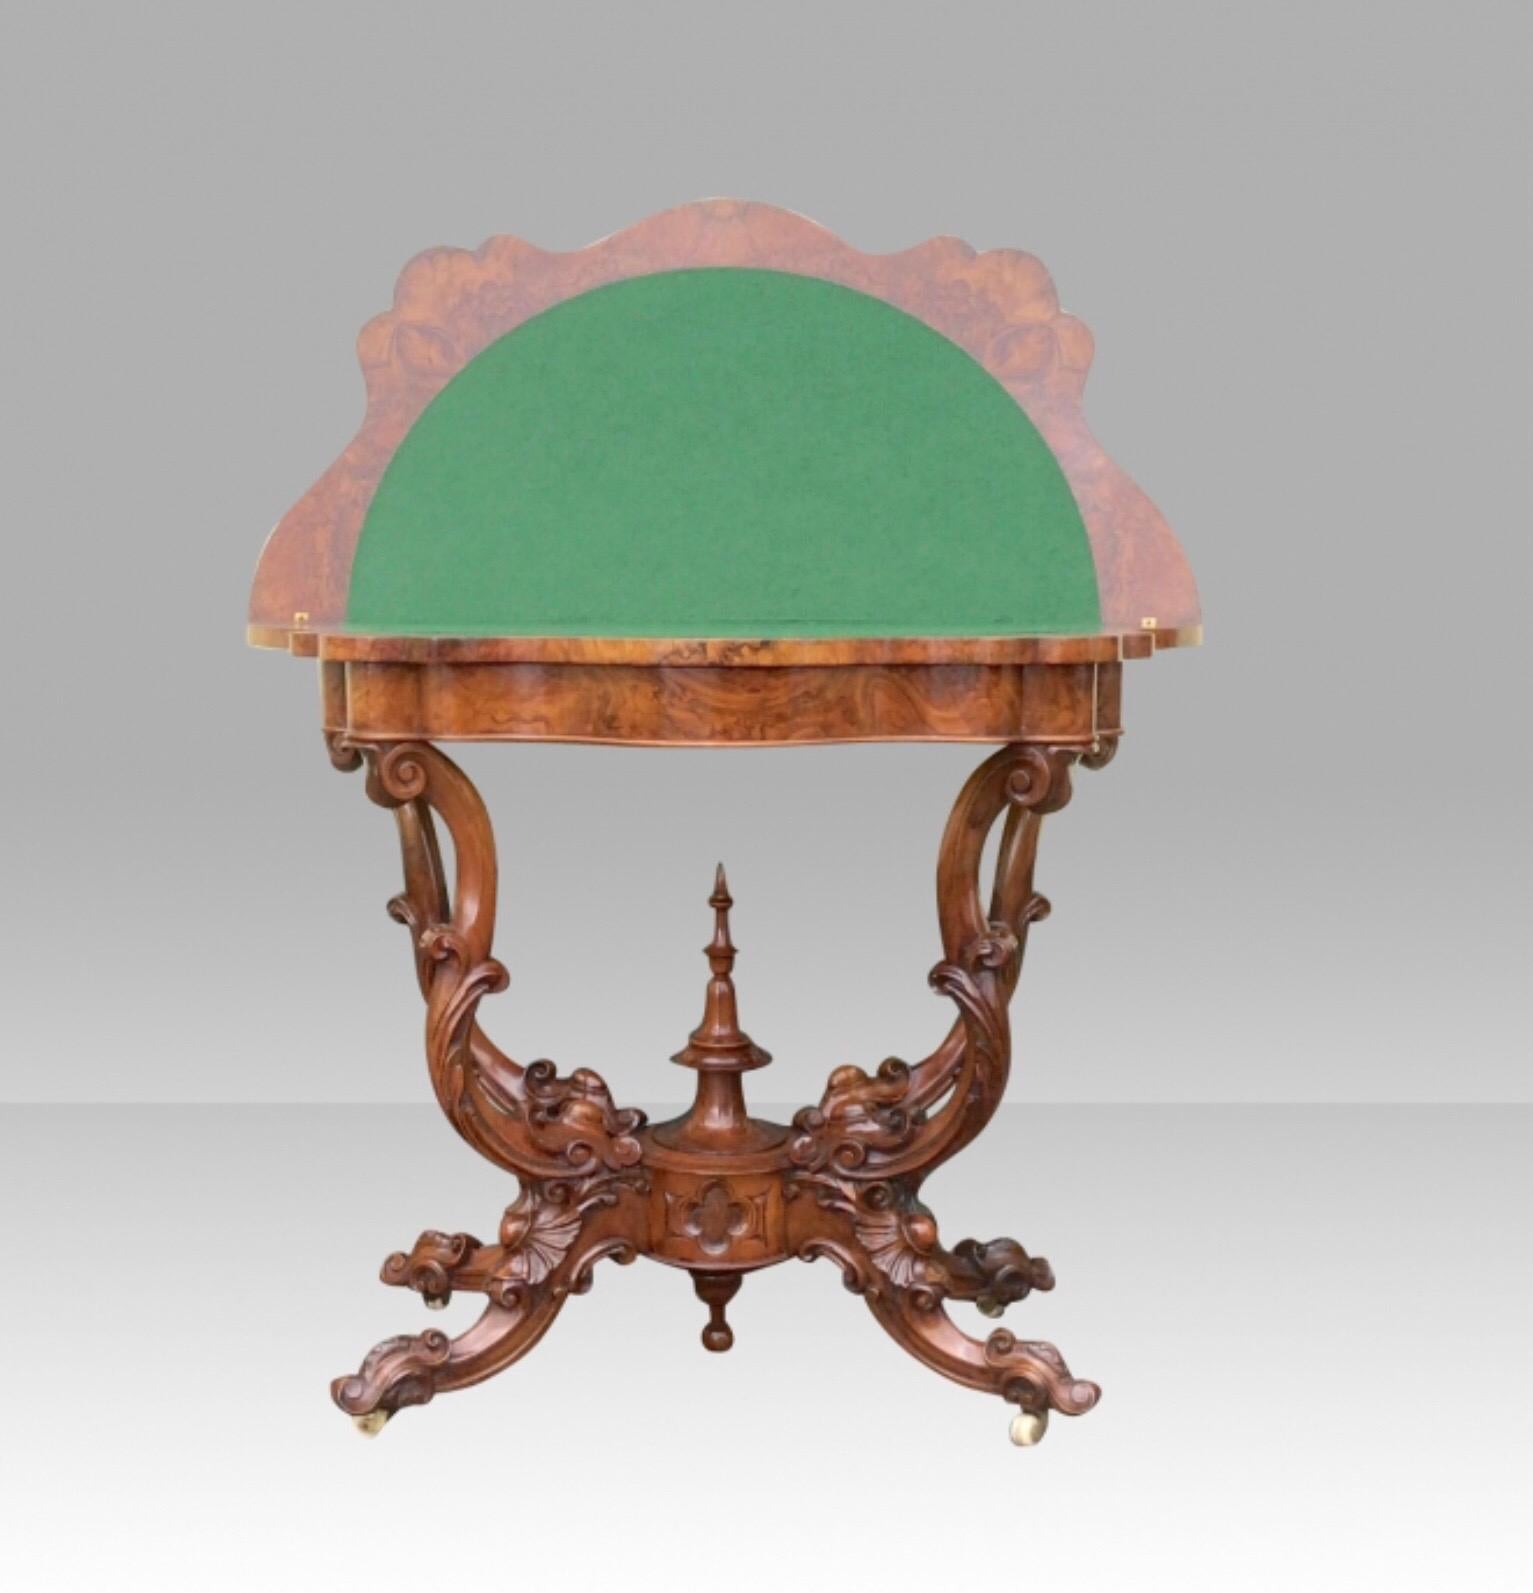 Mid-19th Century Burr Walnut Serpentine Shaped Antique Games, Card Table For Sale